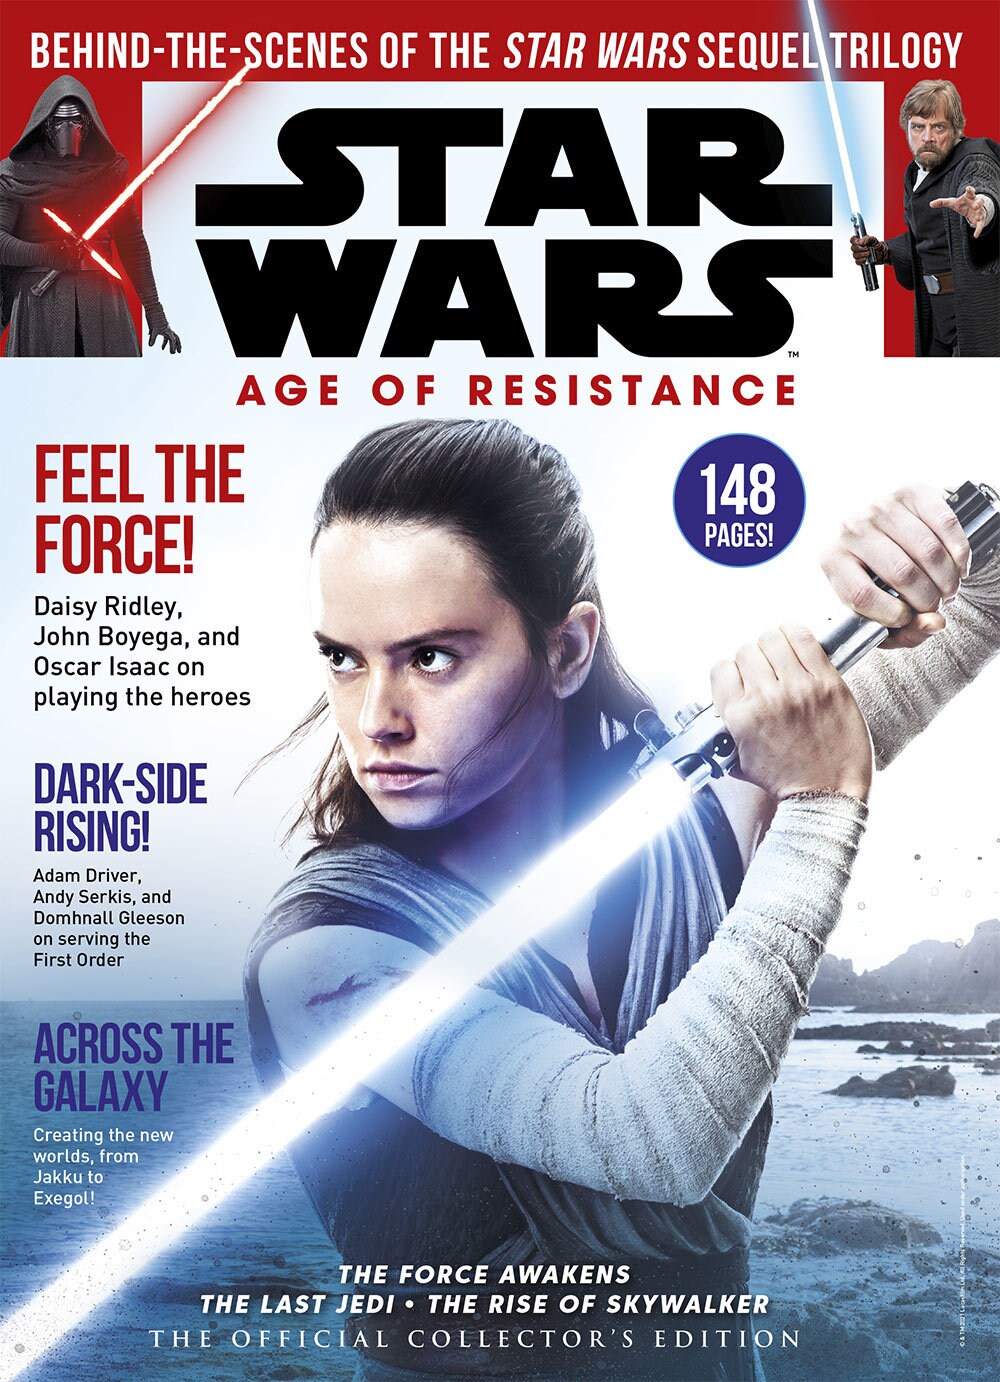 Star Wars: The Age of Resistance cover